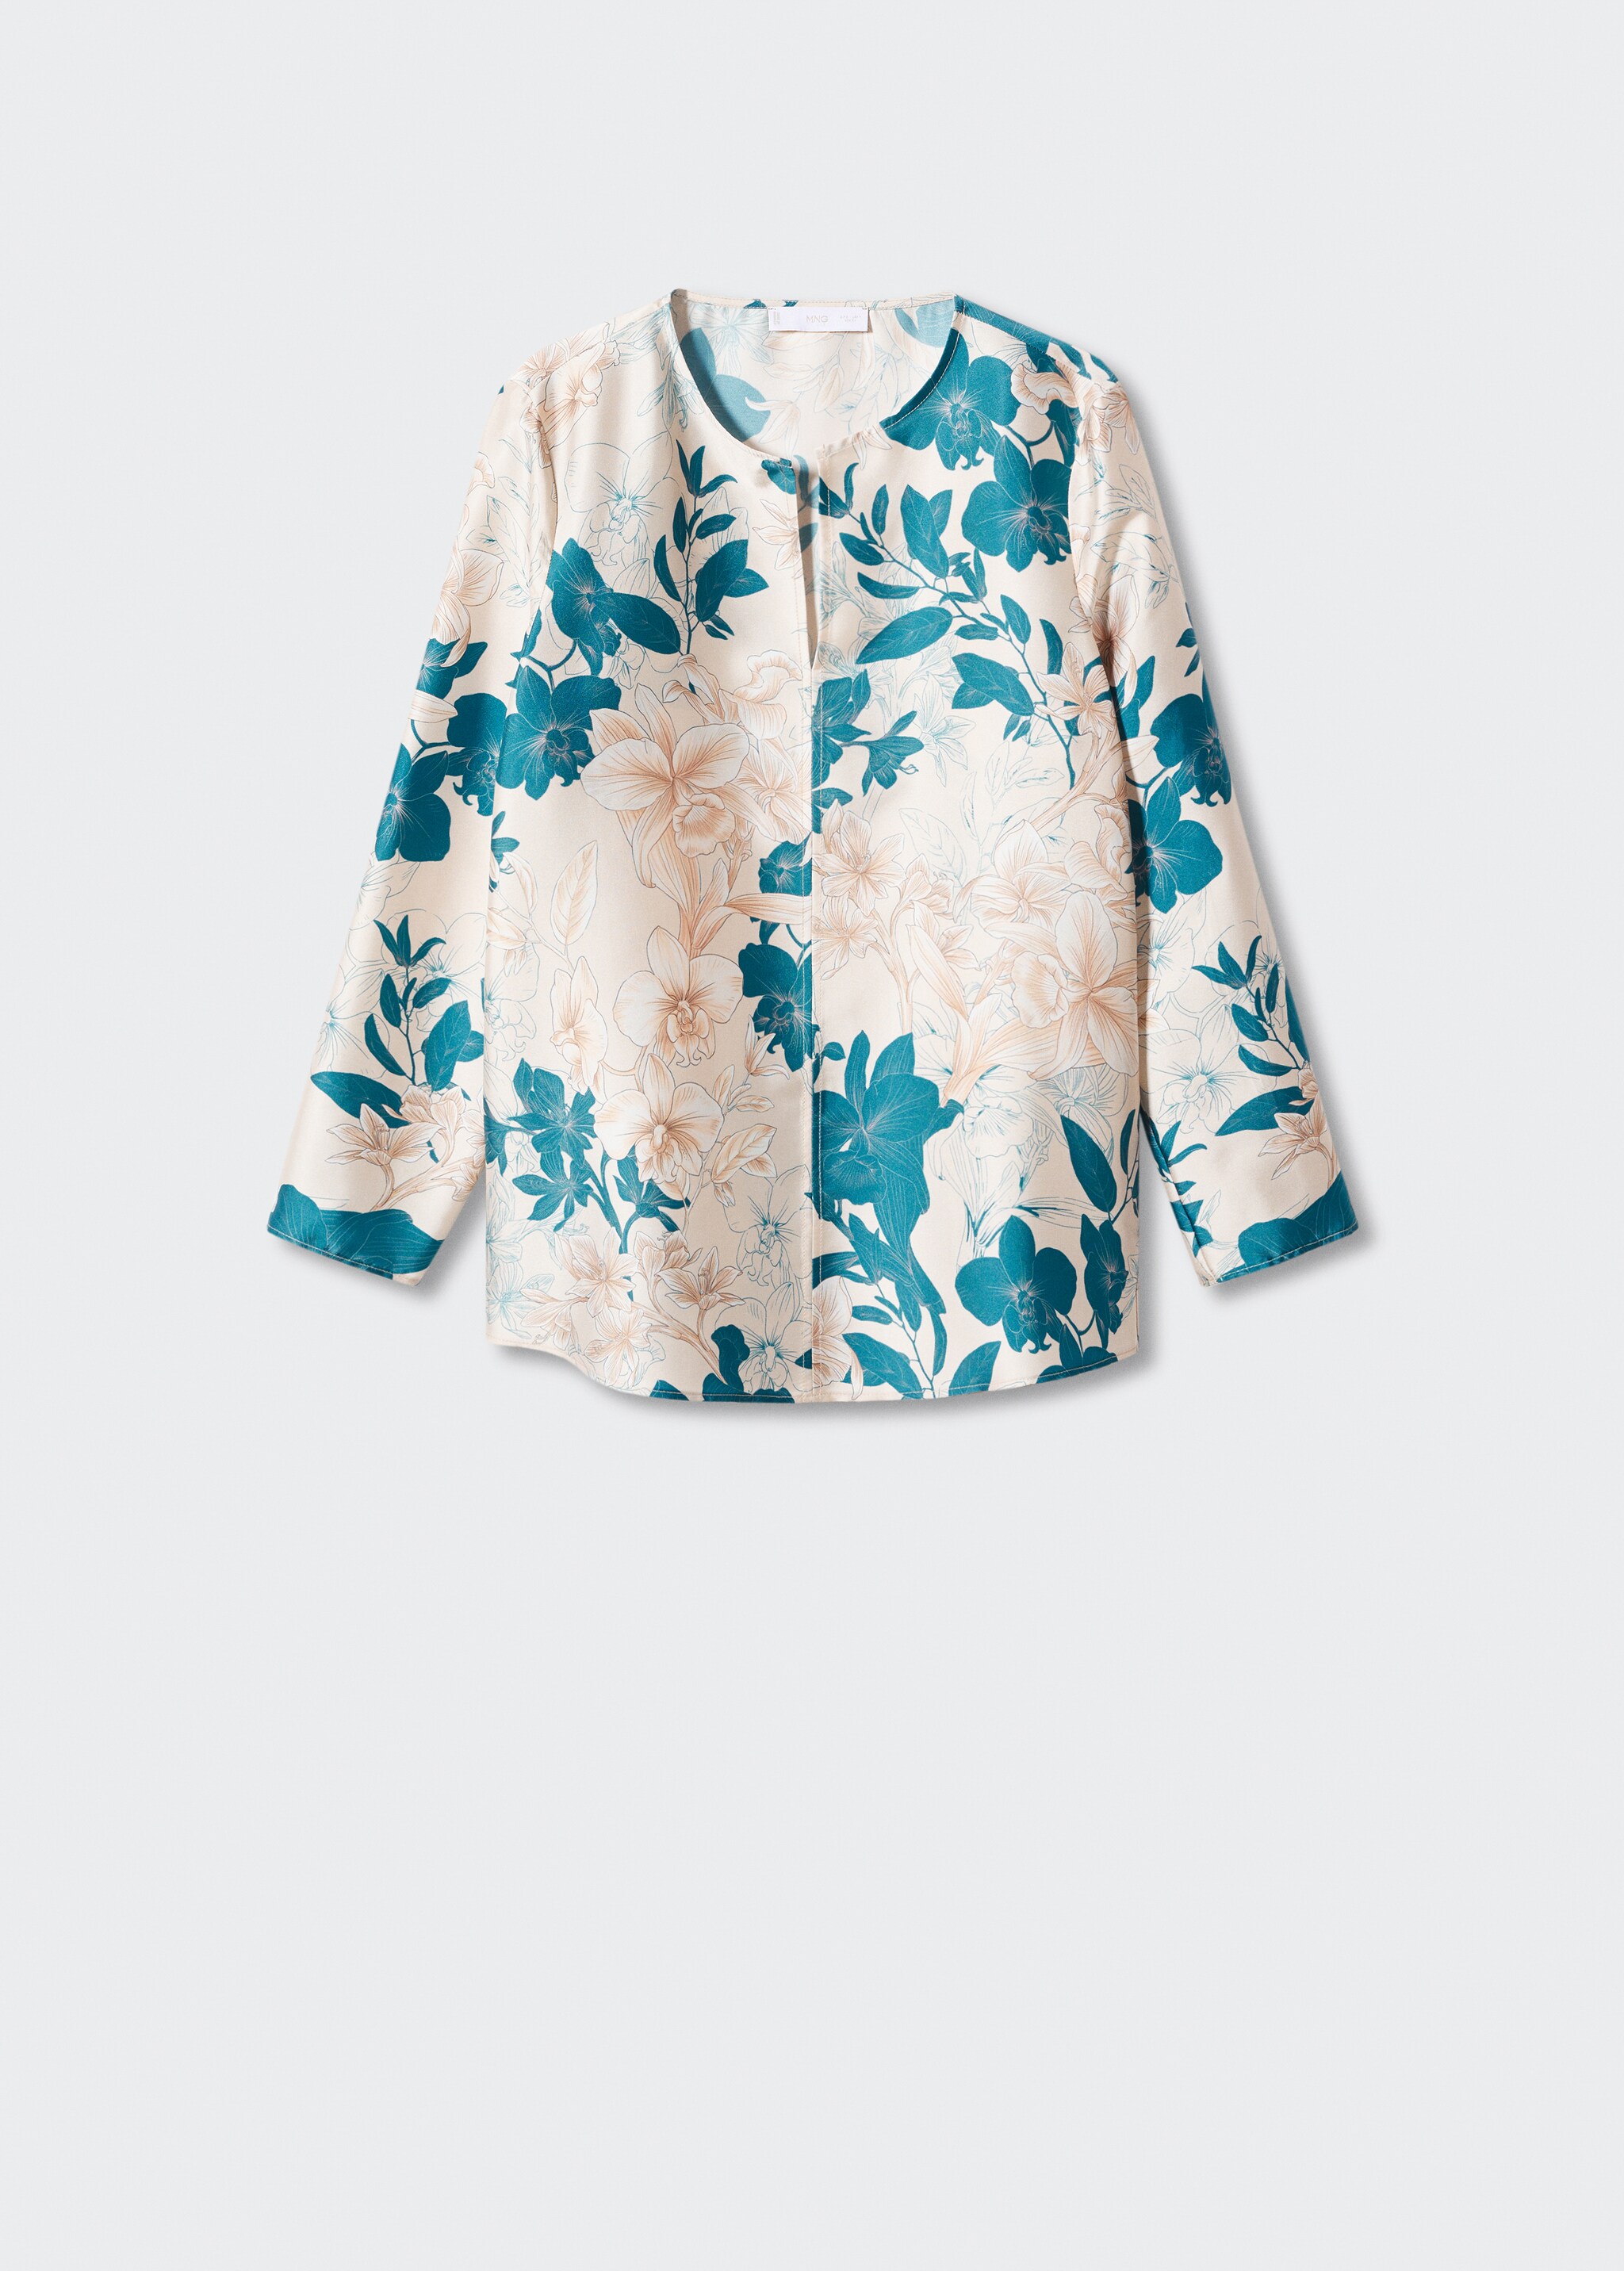 Floral satin blouse - Article without model